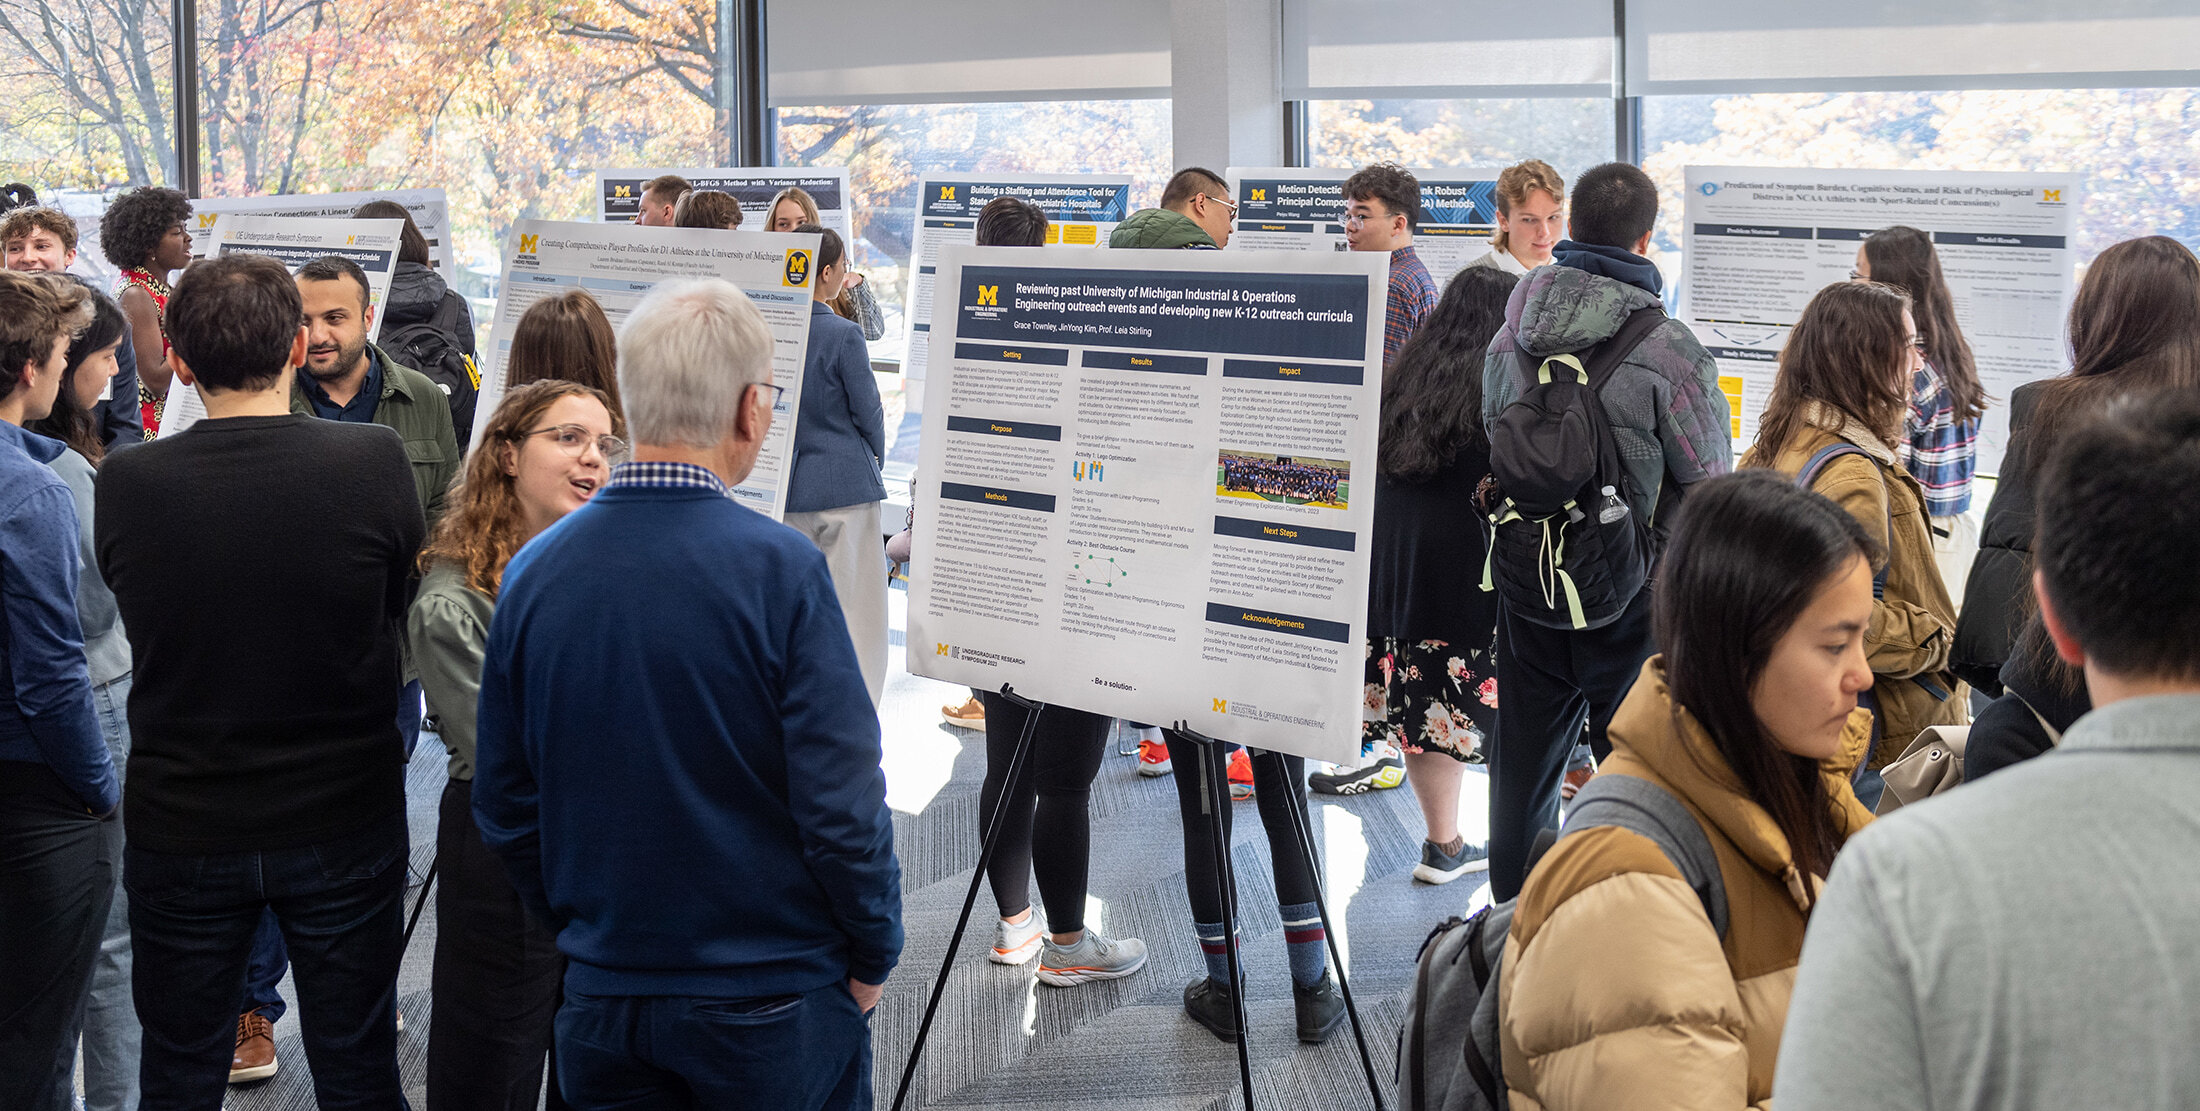 Many people in warm clothing rotate around a crowded room while looking at research posters